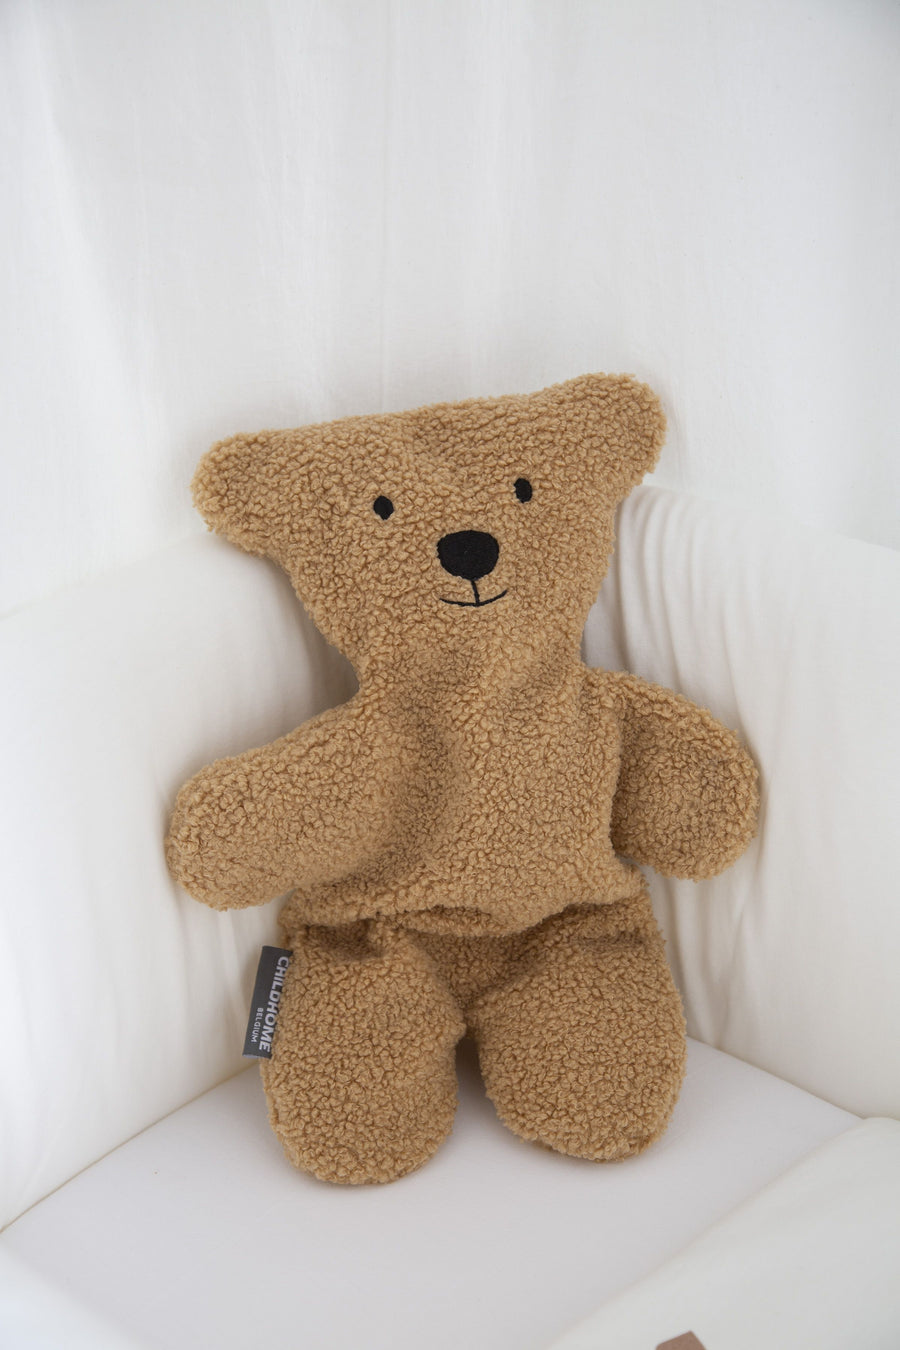 Soft toy Teddy little brown bear - Childhome 